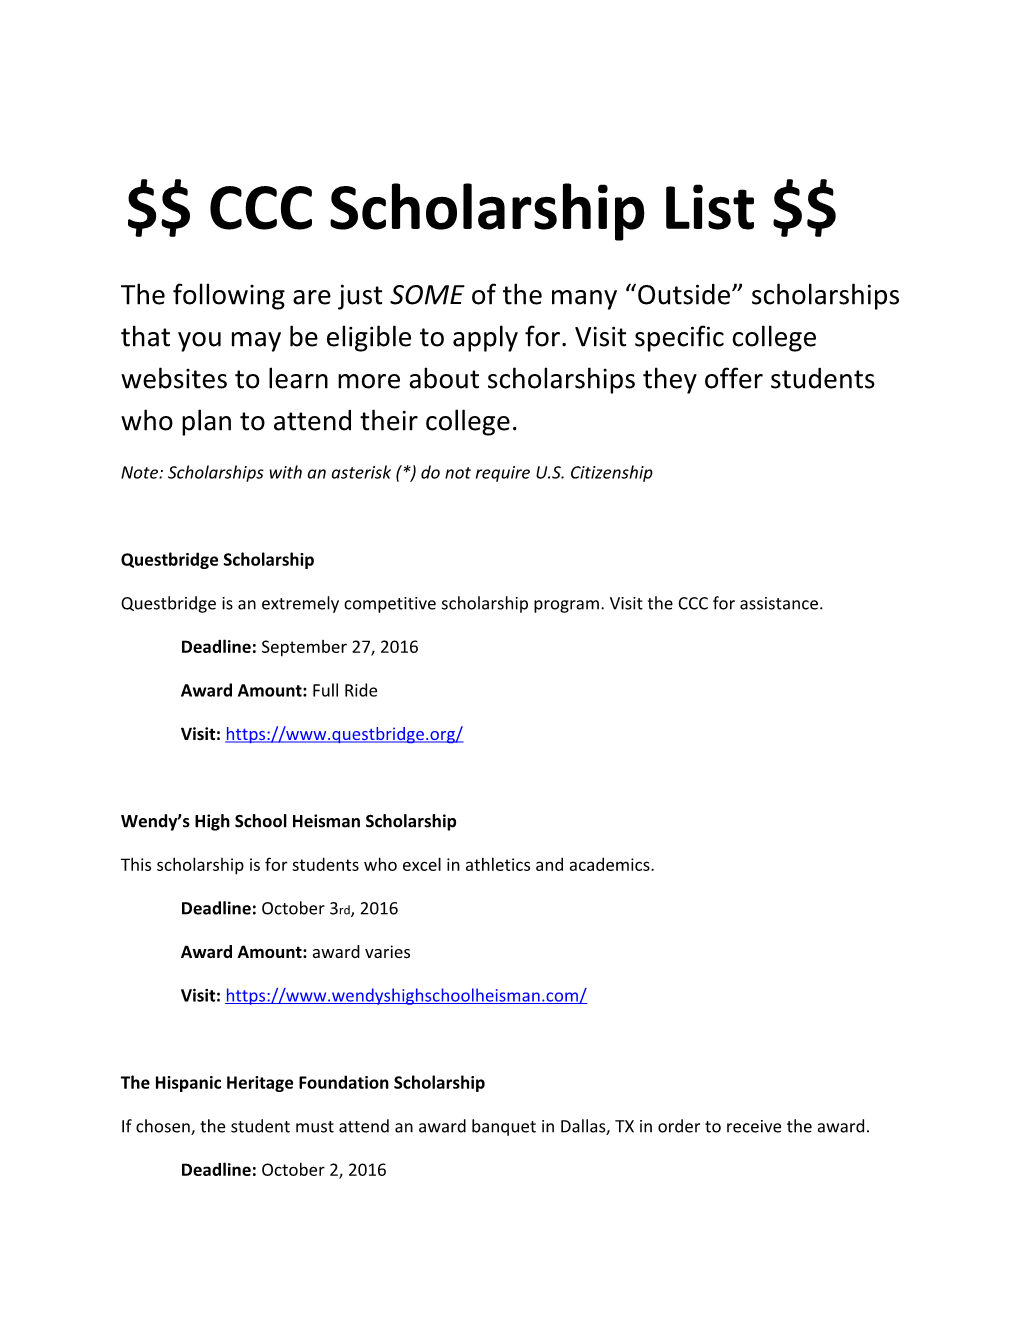 Note: Scholarships with an Asterisk (*) Do Not Require U.S. Citizenship